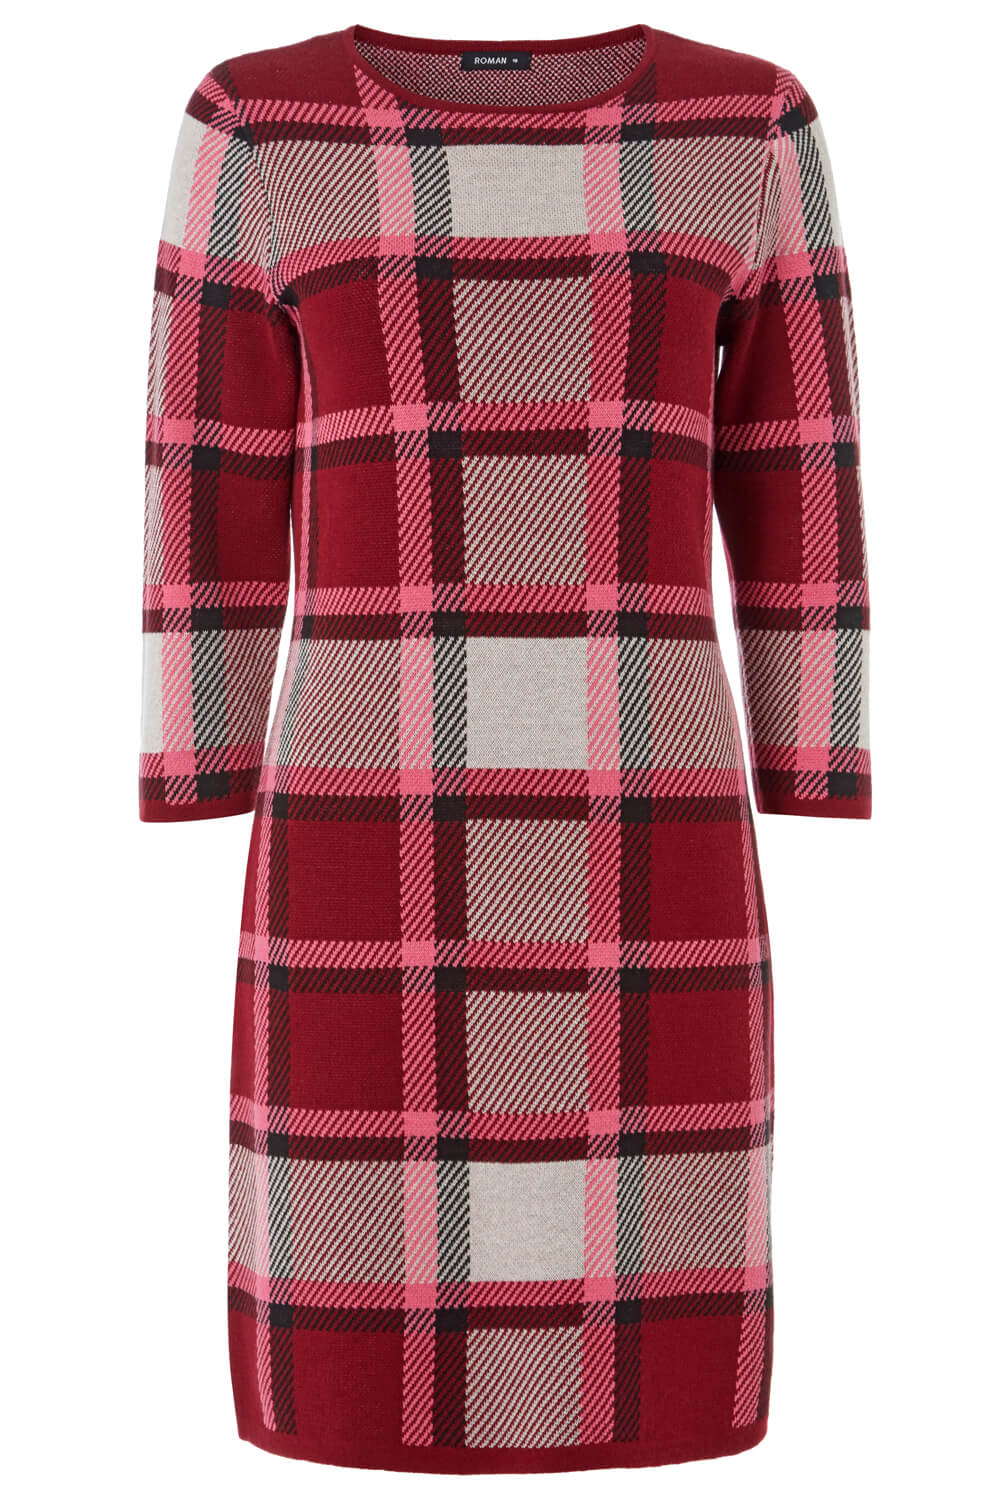 PINK Check Print Knitted Dress, Image 5 of 5